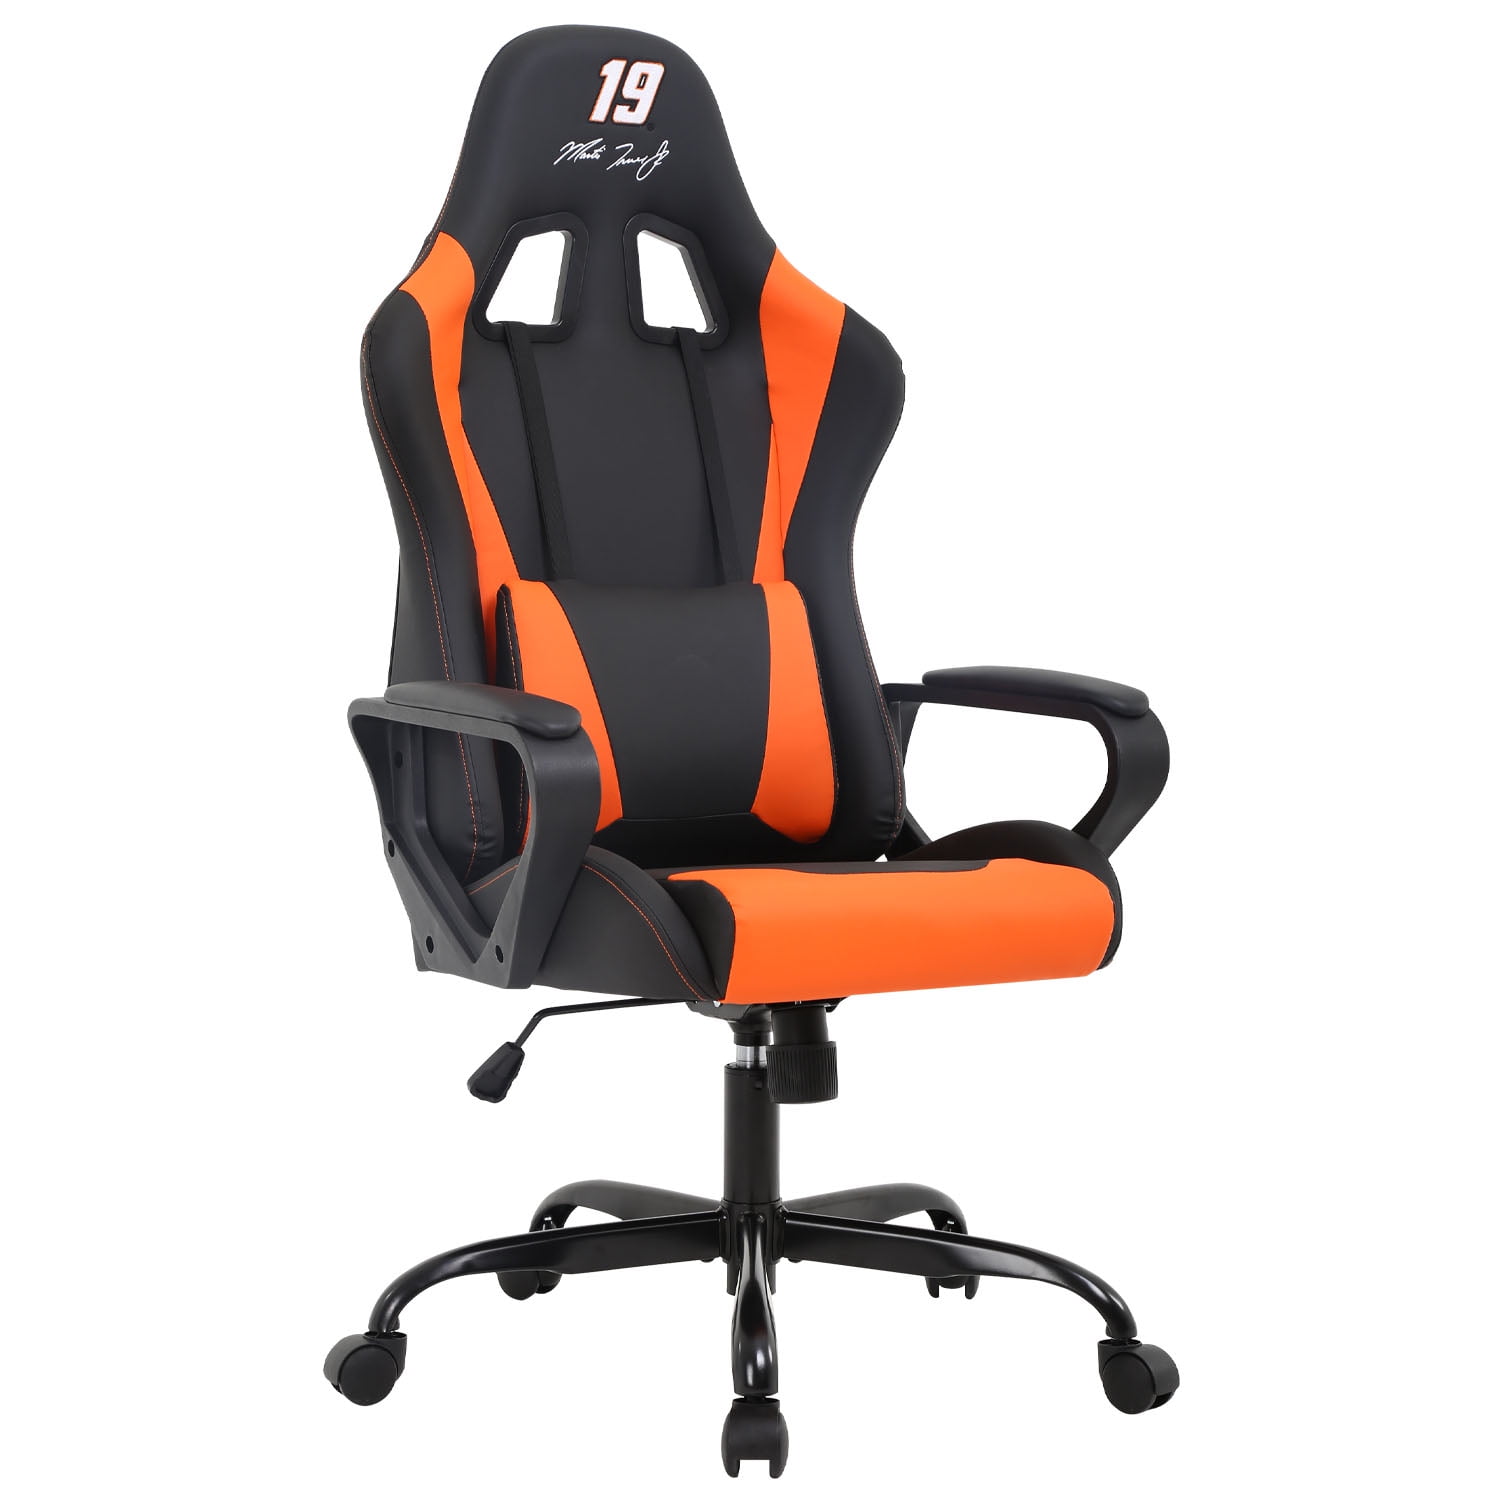 BestOffice Office High Back PU Gaming Computer Chair with Lumbar Support  for Adults,D19 